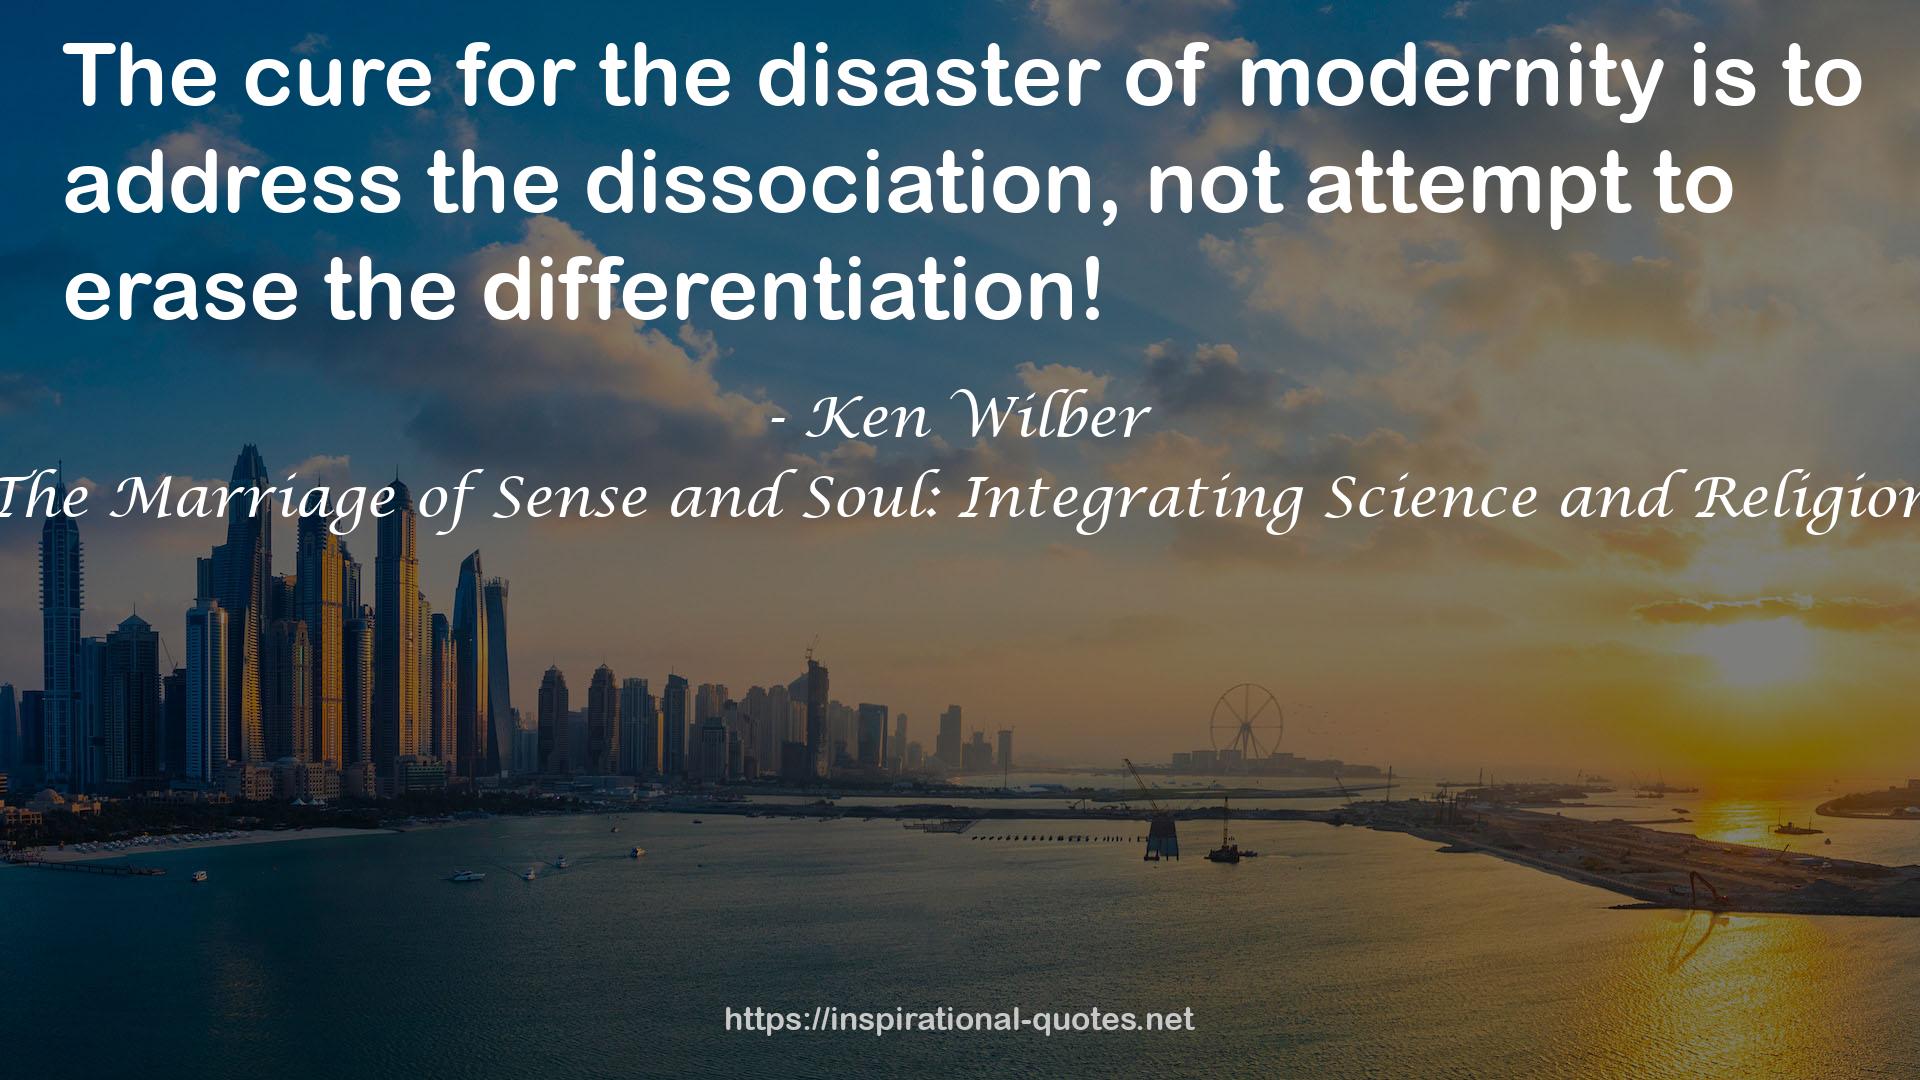 The Marriage of Sense and Soul: Integrating Science and Religion QUOTES